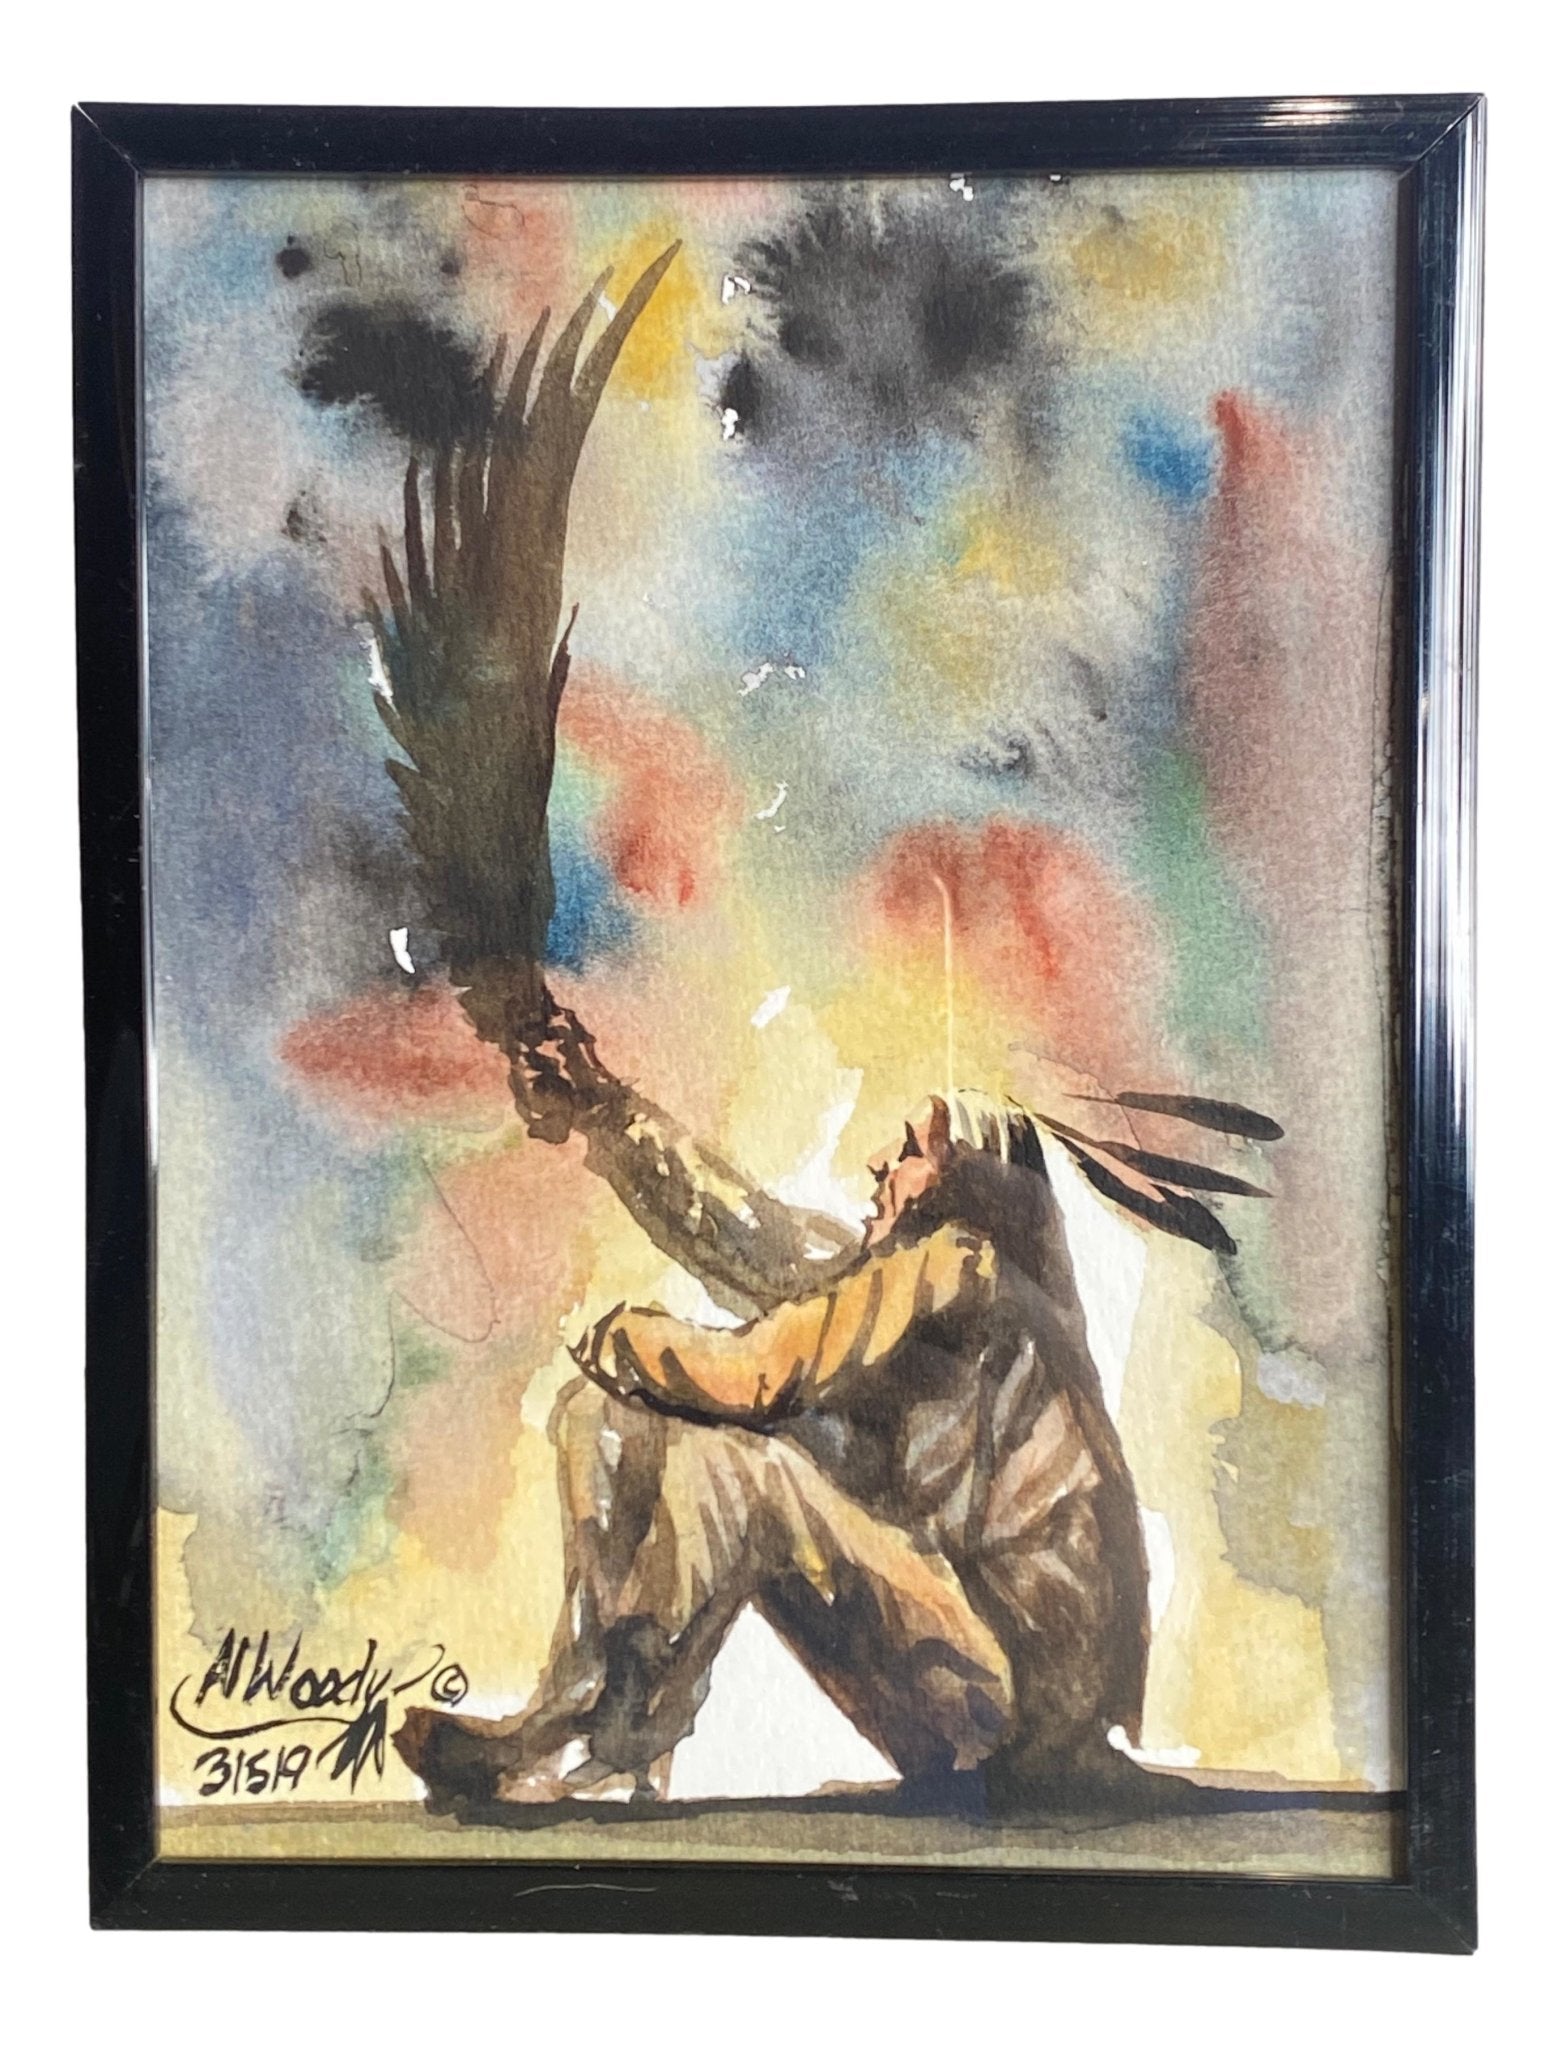 Frame Watercolor Navajo Eagle's Wing Handpainted by New Mexico Artist Woody 8 1/2 L x 6 1/2 W Inches - Ysleta Mission Gift Shop- VOTED 2022 El Paso's Best Gift Shop